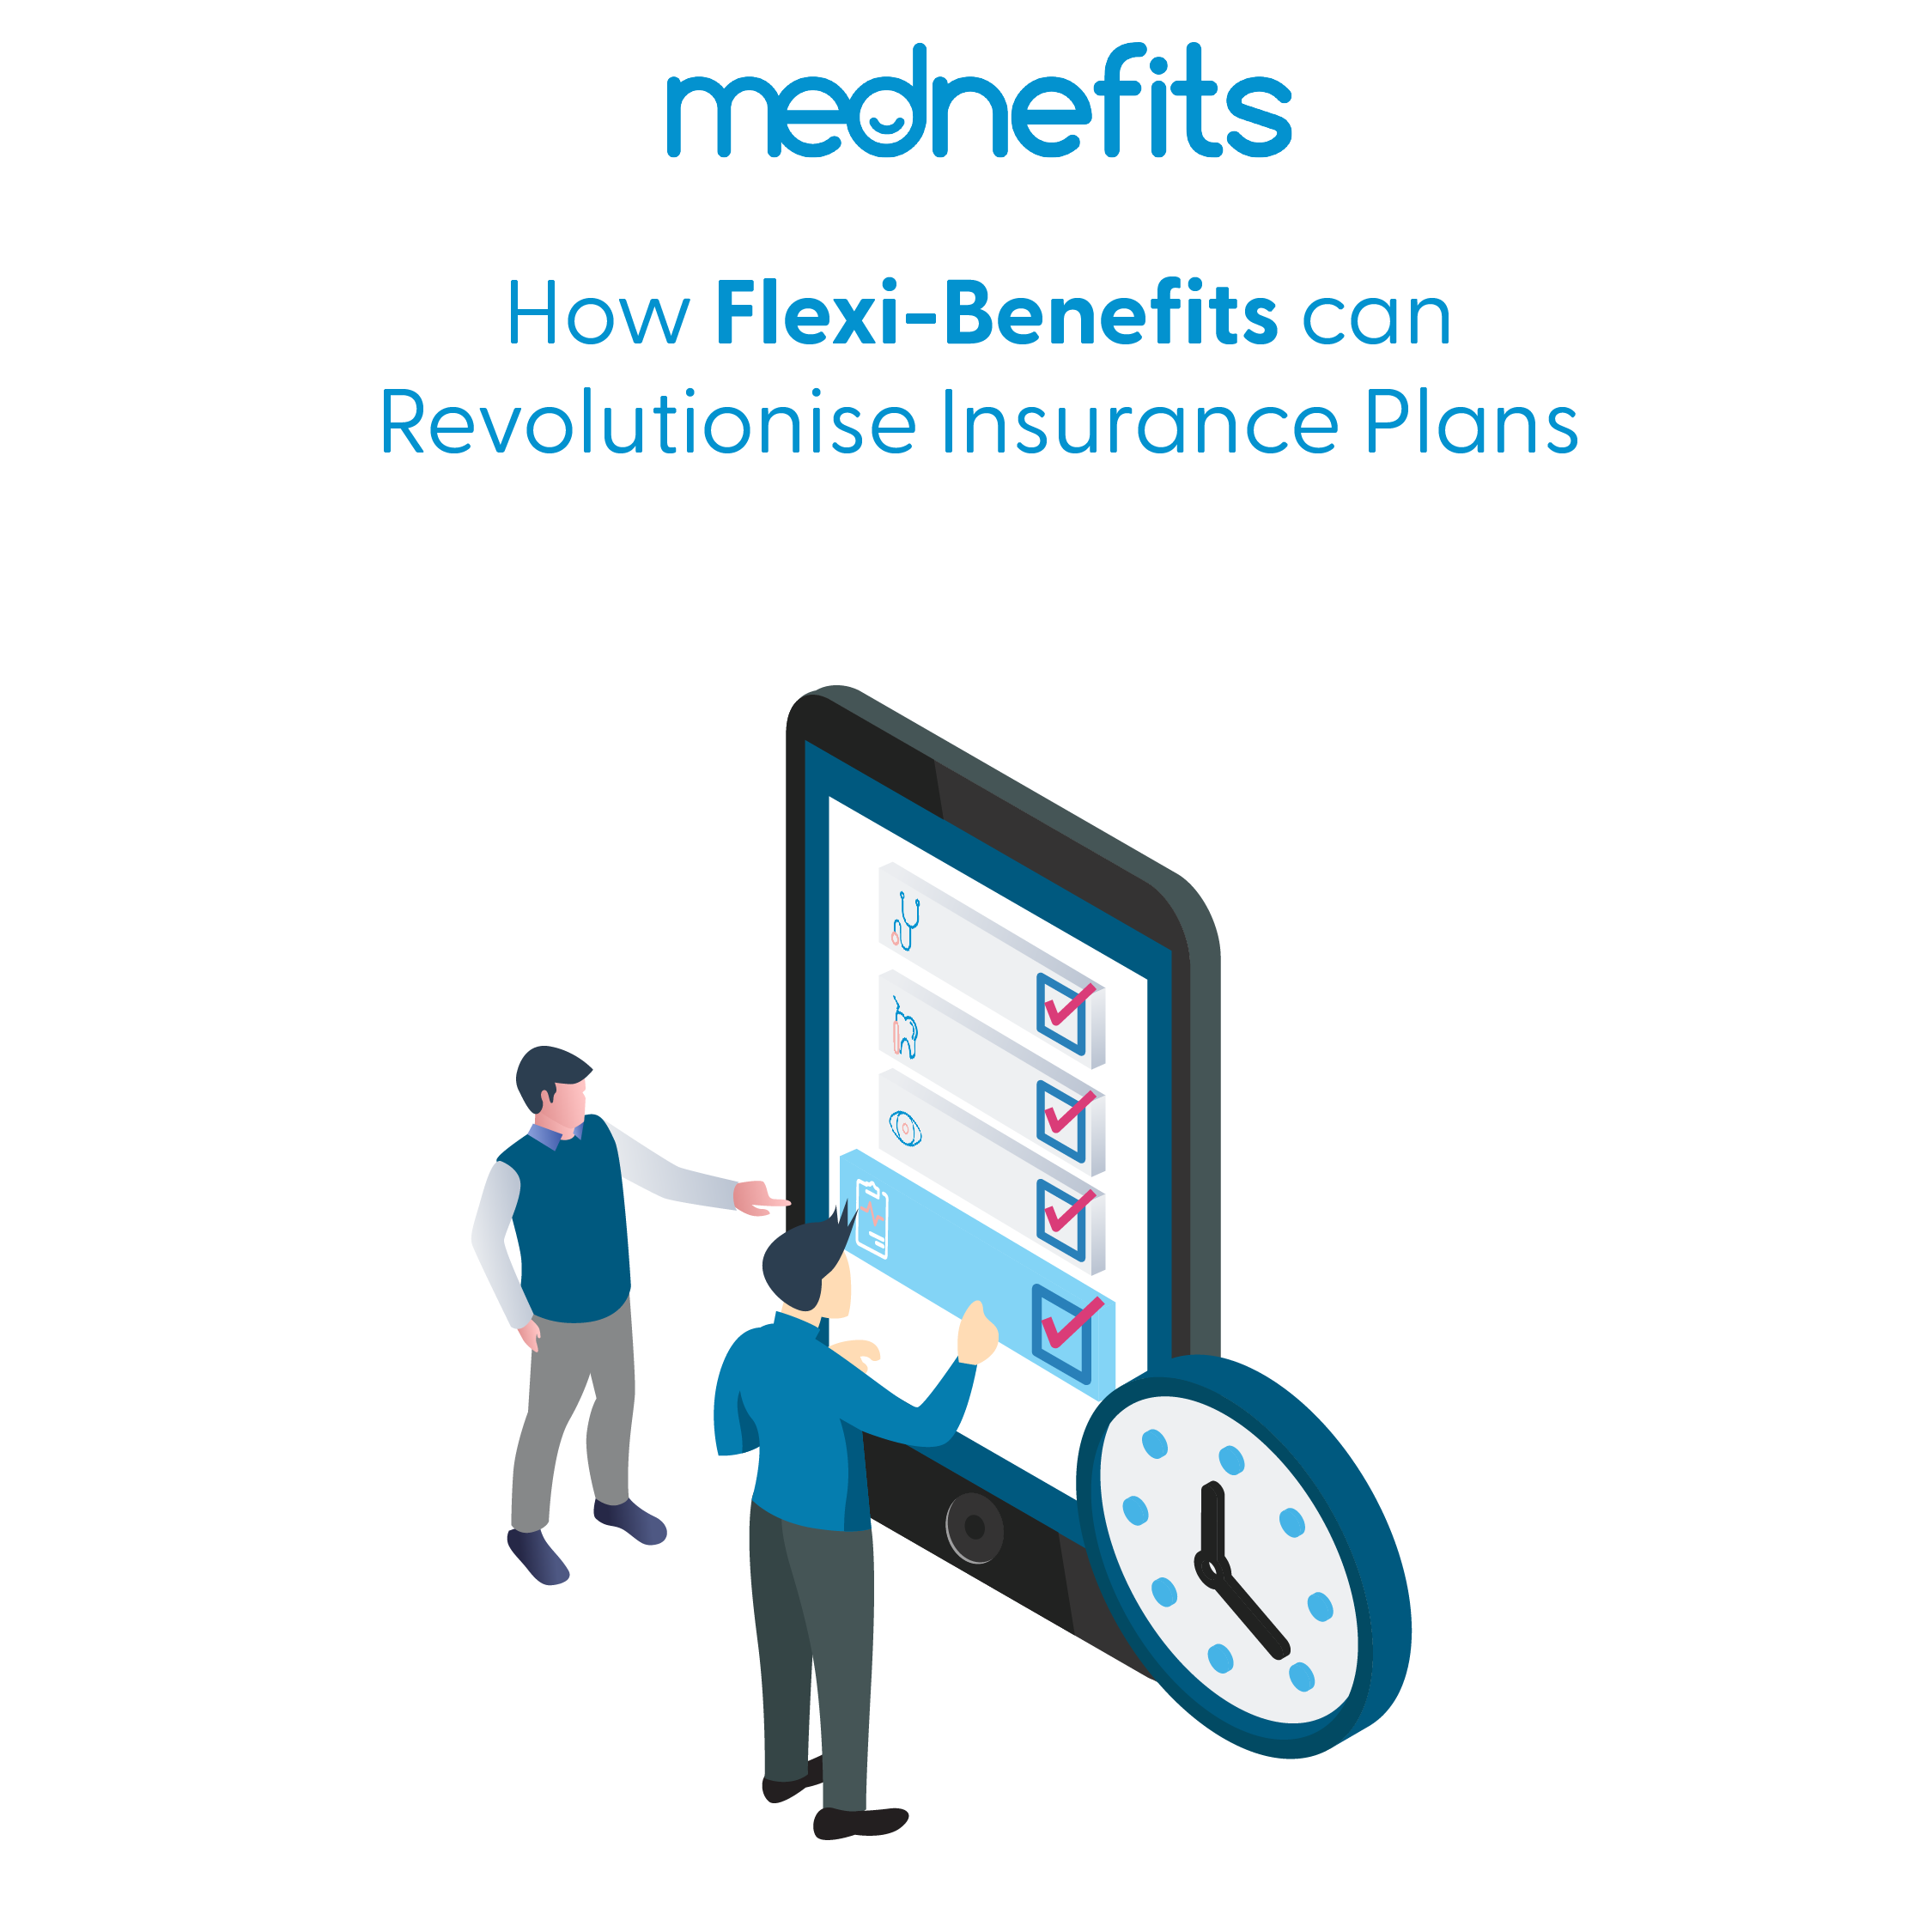 How flexi-benefit schemes can revolutionise insurance plans for IT and professional service businesses